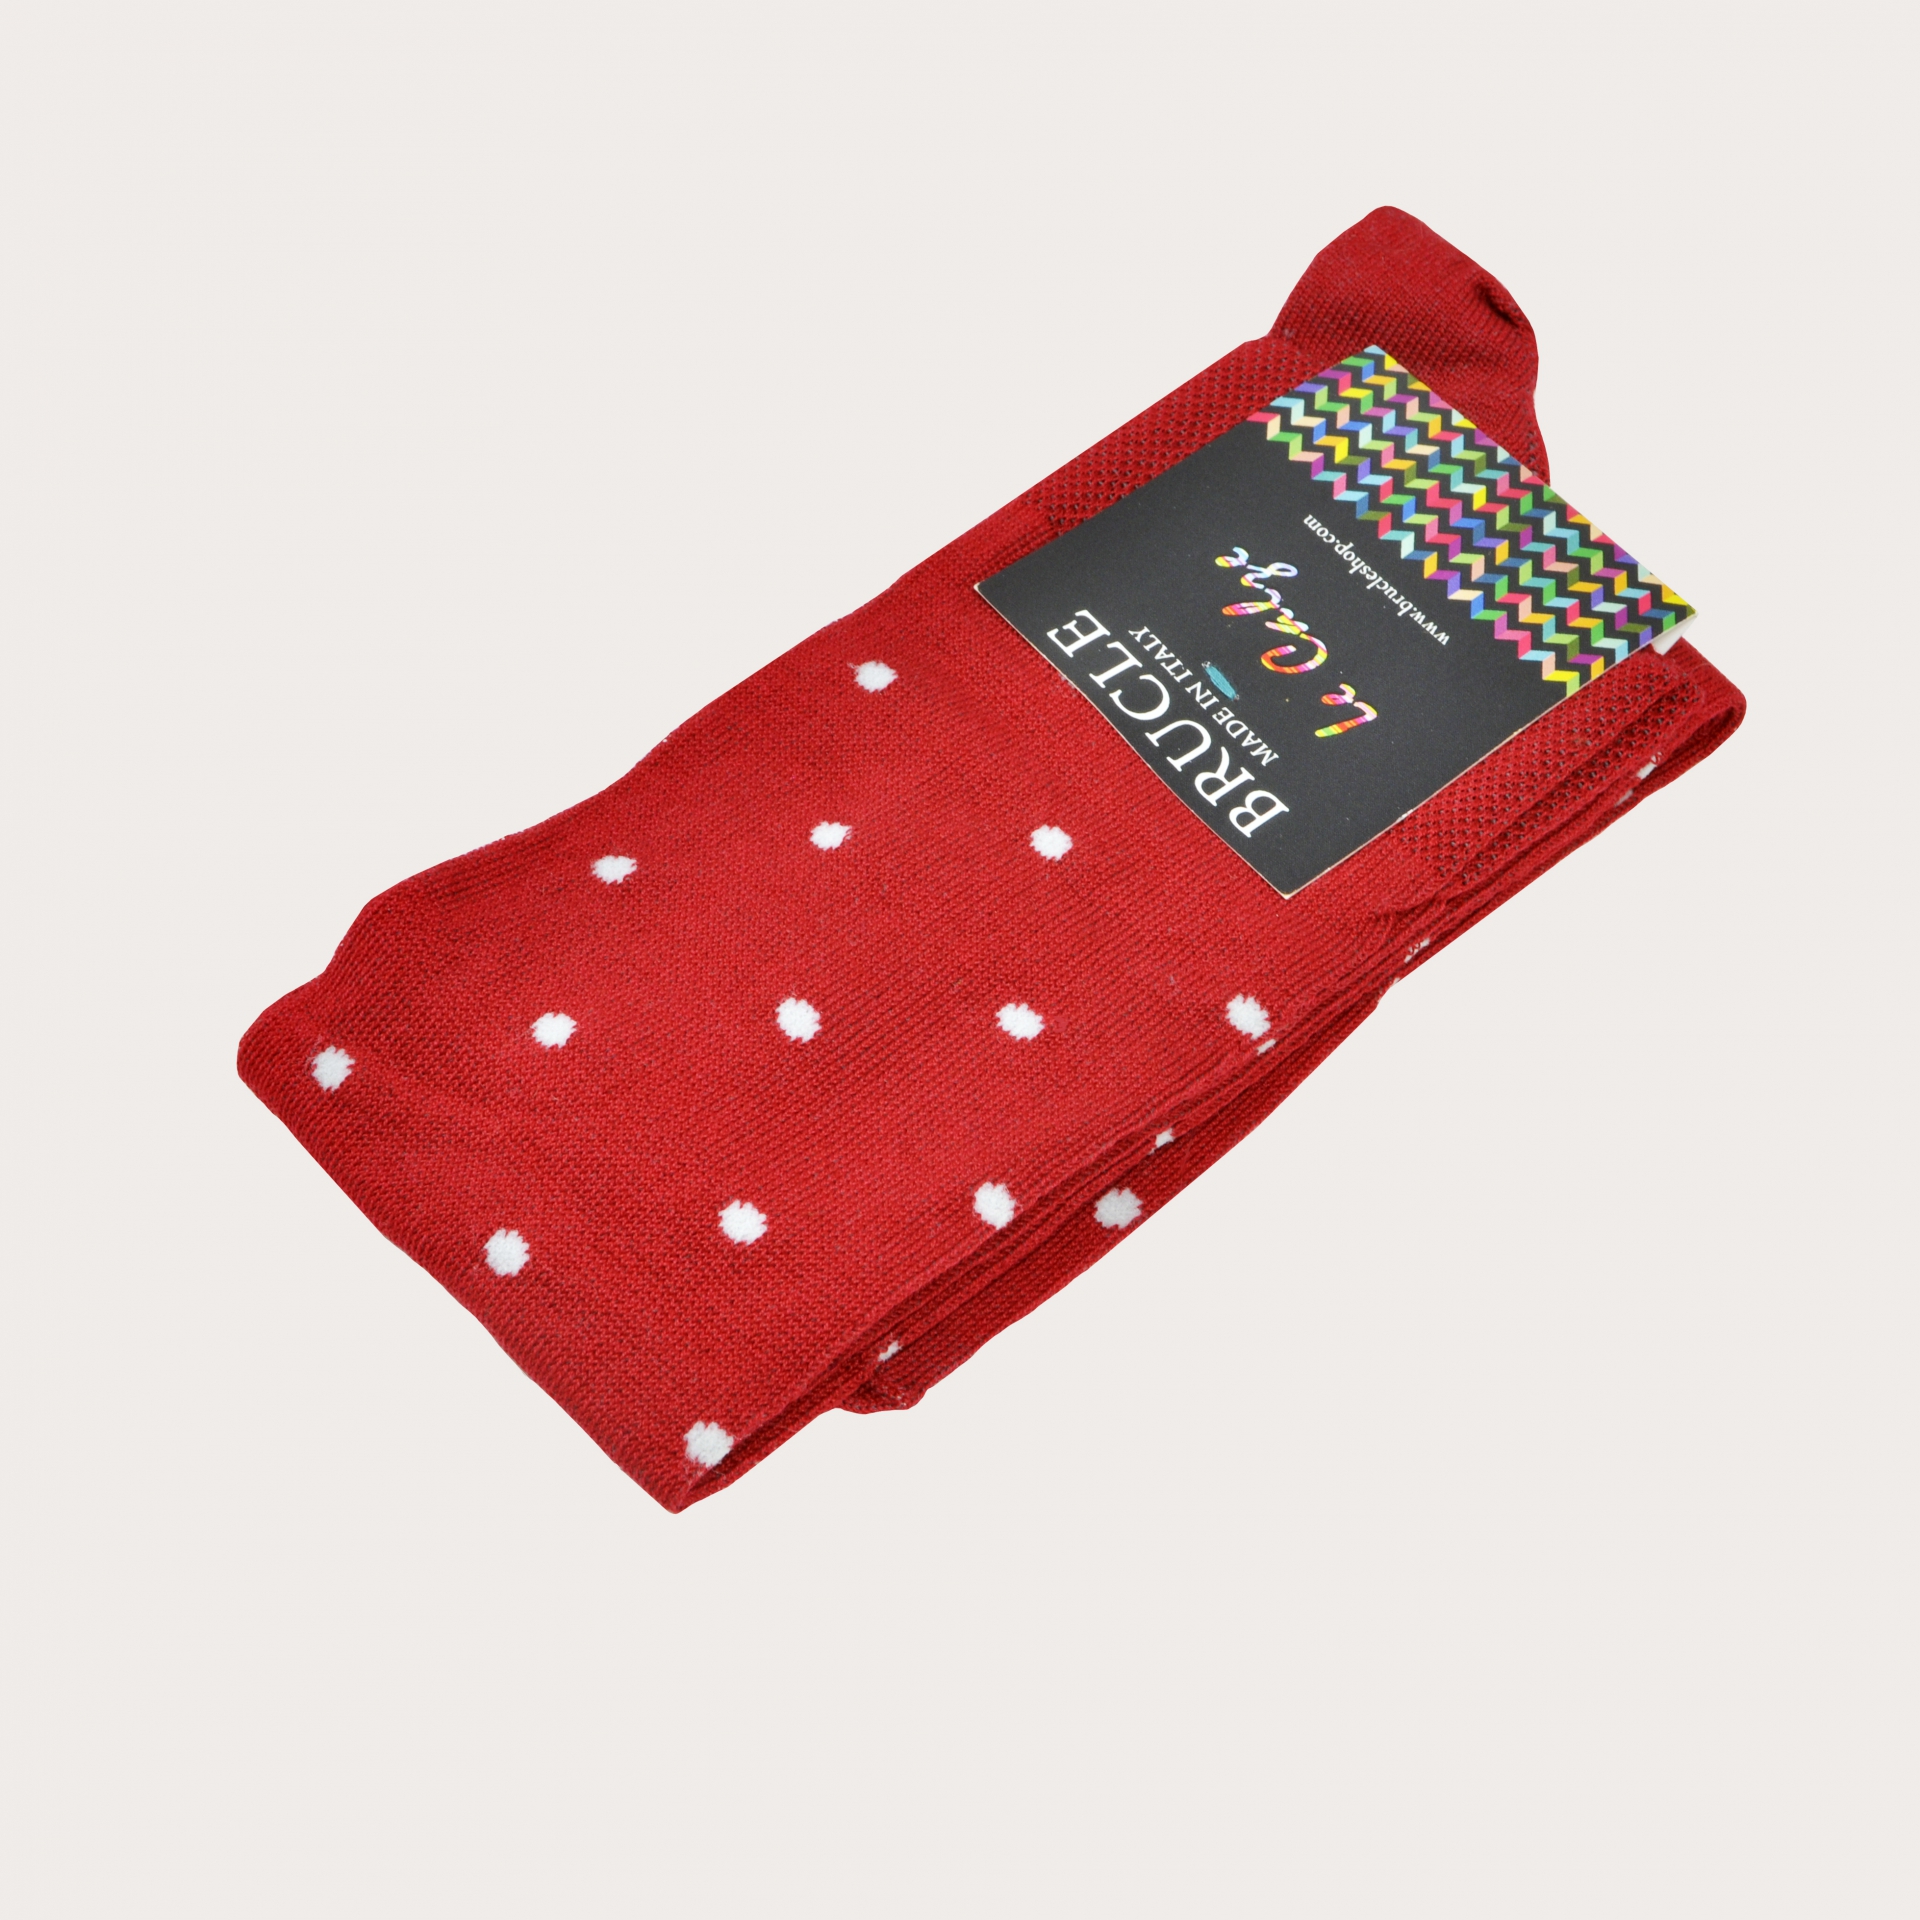 BRUCLE Red summer socks with white polka dots